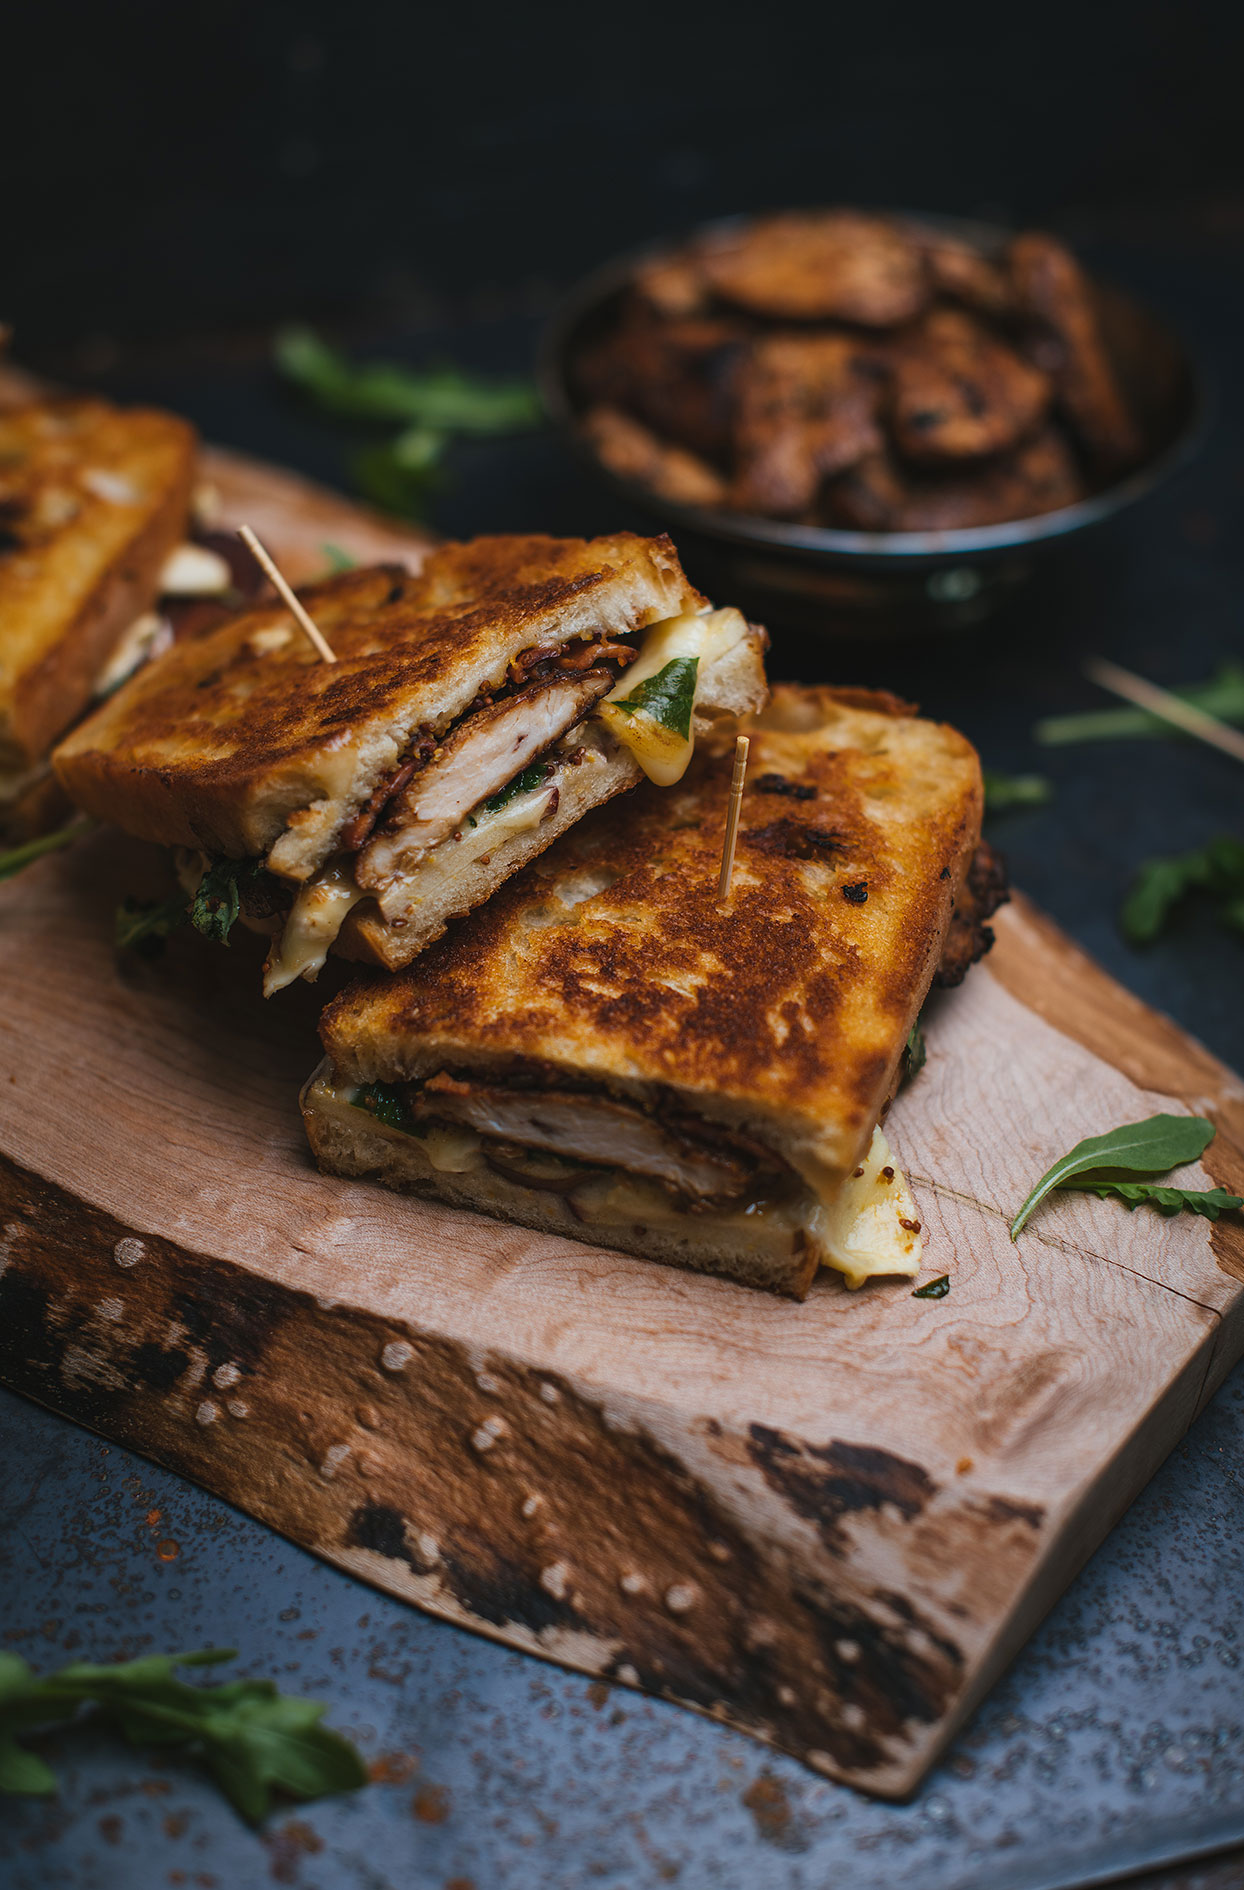 Grilled cheese with balsamic vinegar grilled chicken, brie cheese and apples